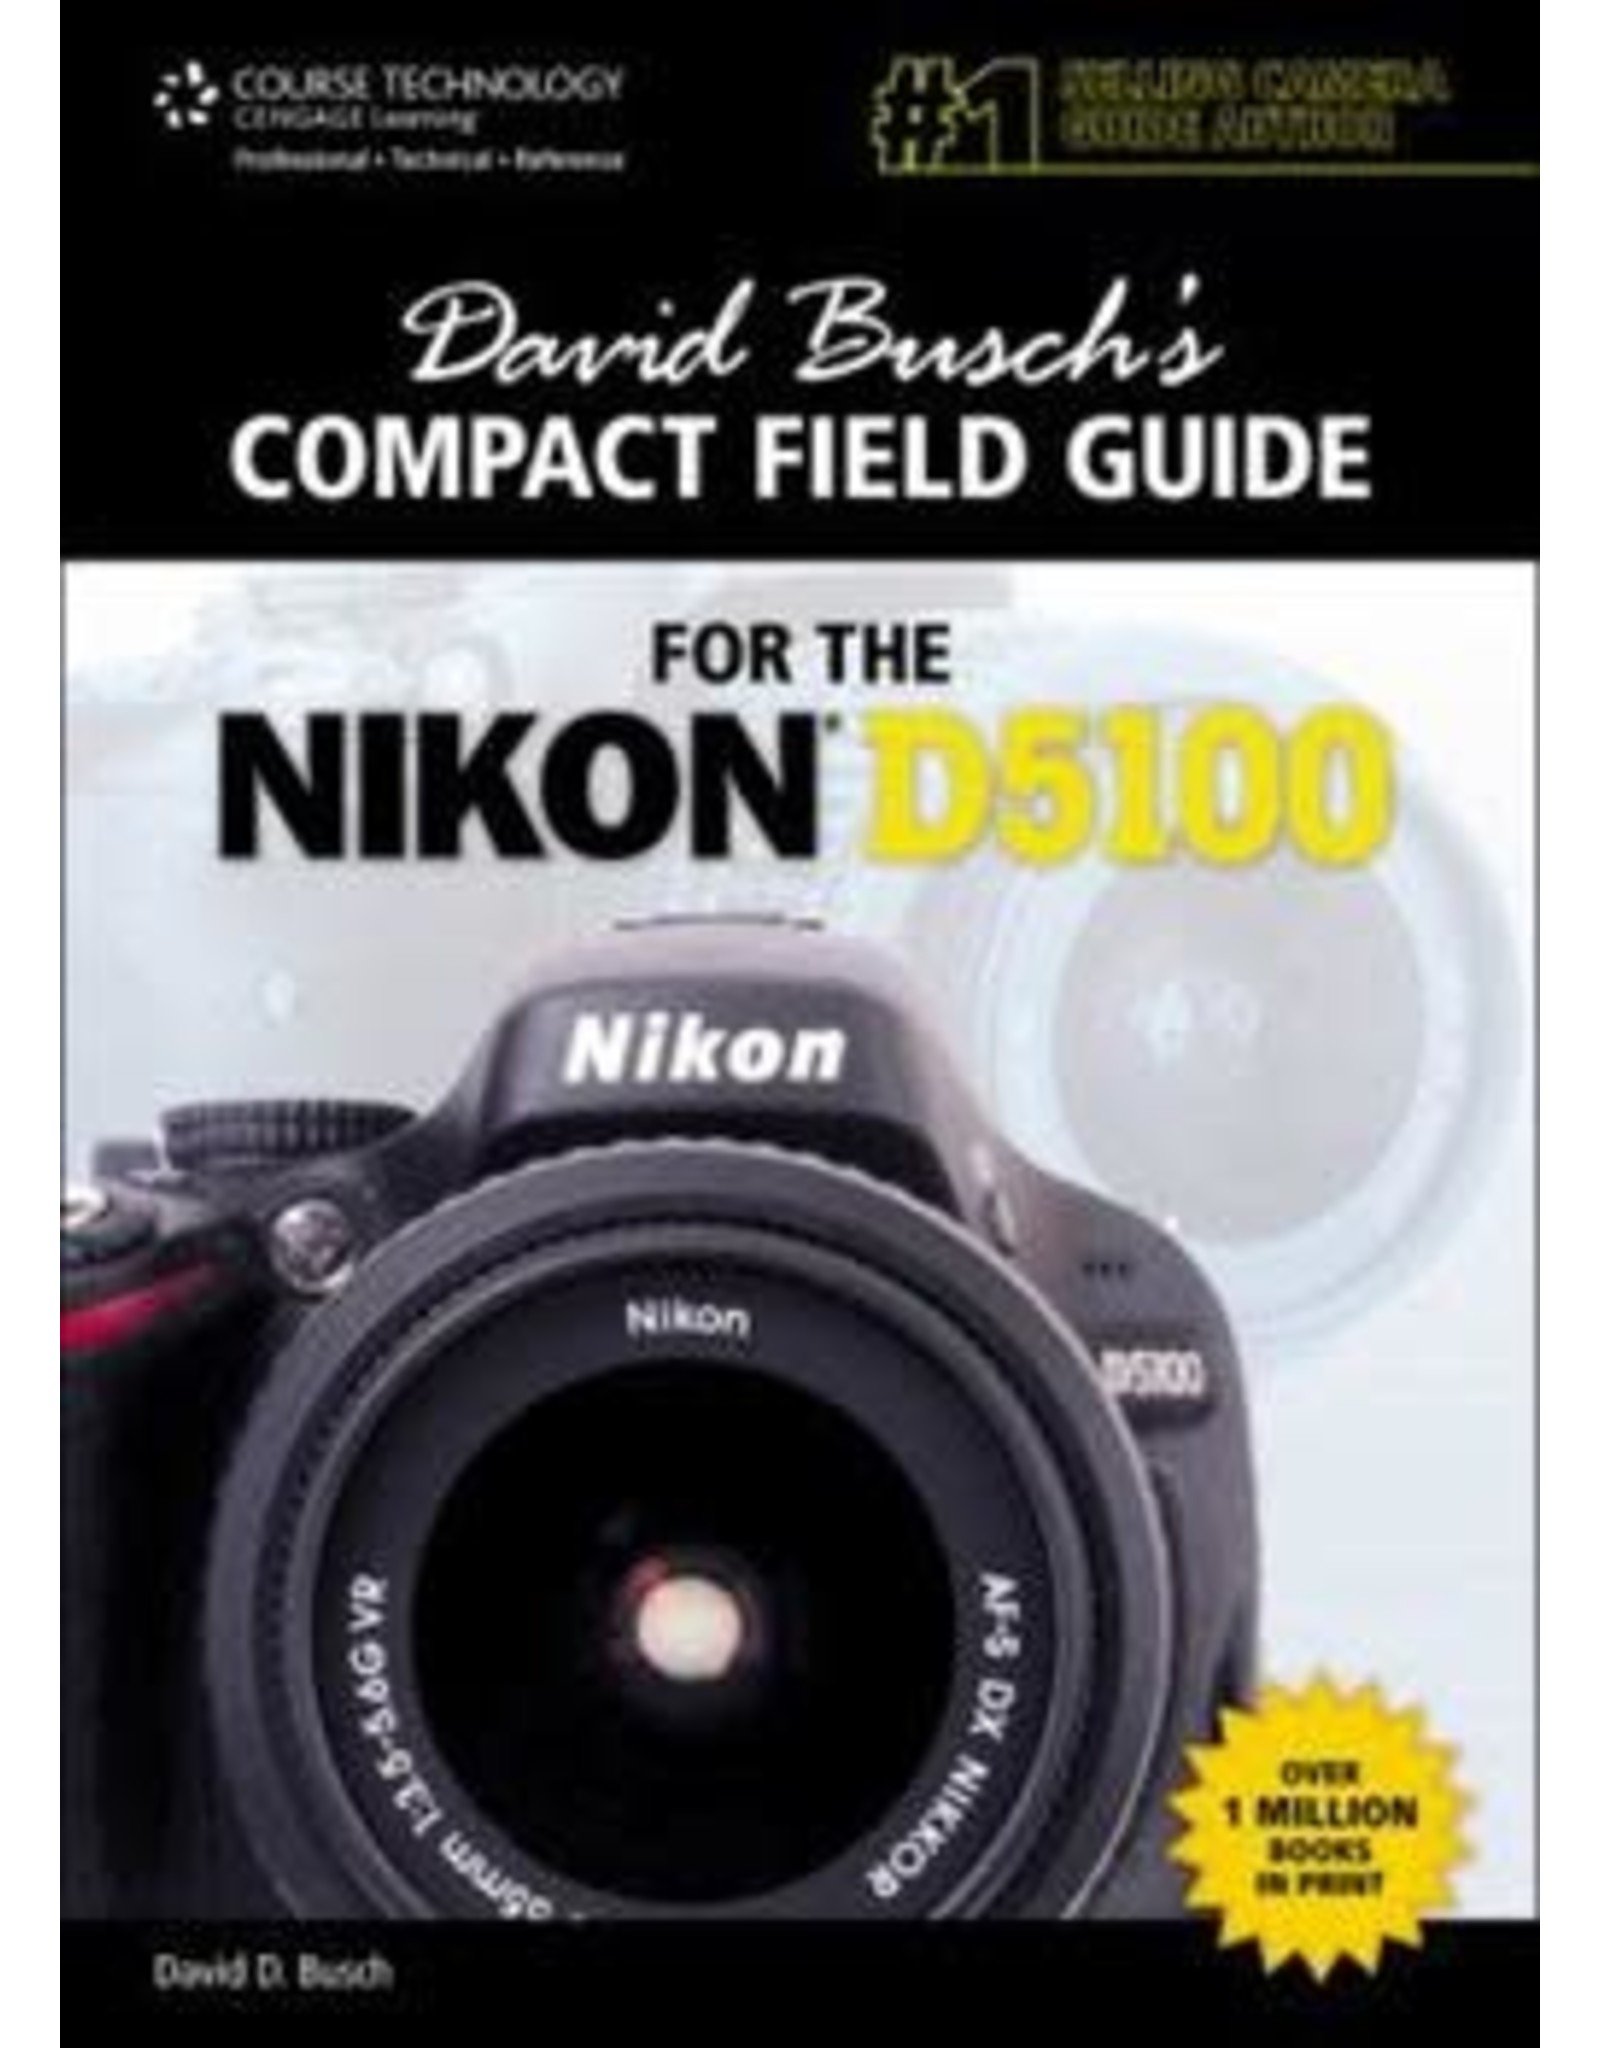 Compact Field Guide for the Nikon D90